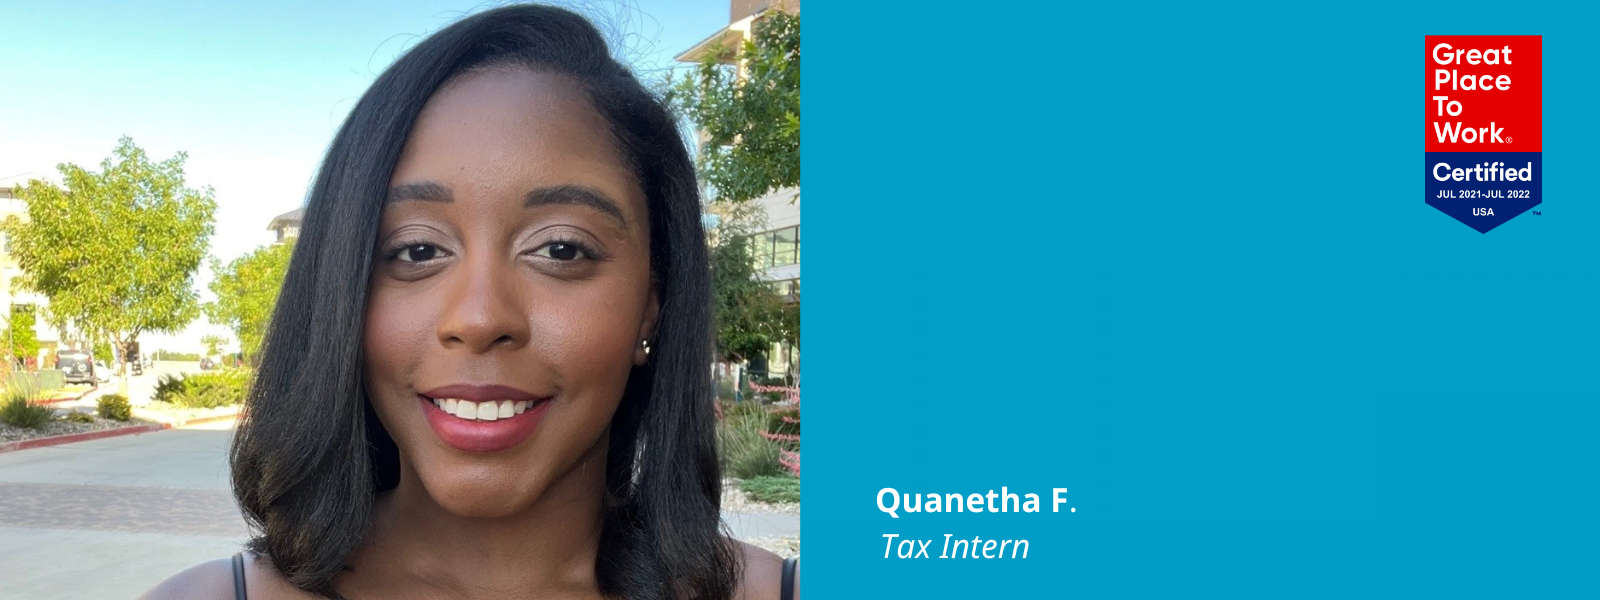 Photo of Quanetha F. next to a blue box that has a Great Place To Work Certified logo in it (it also says Jul 2021-Jul 2022 USA) and text: Quanetha F., Tax Intern